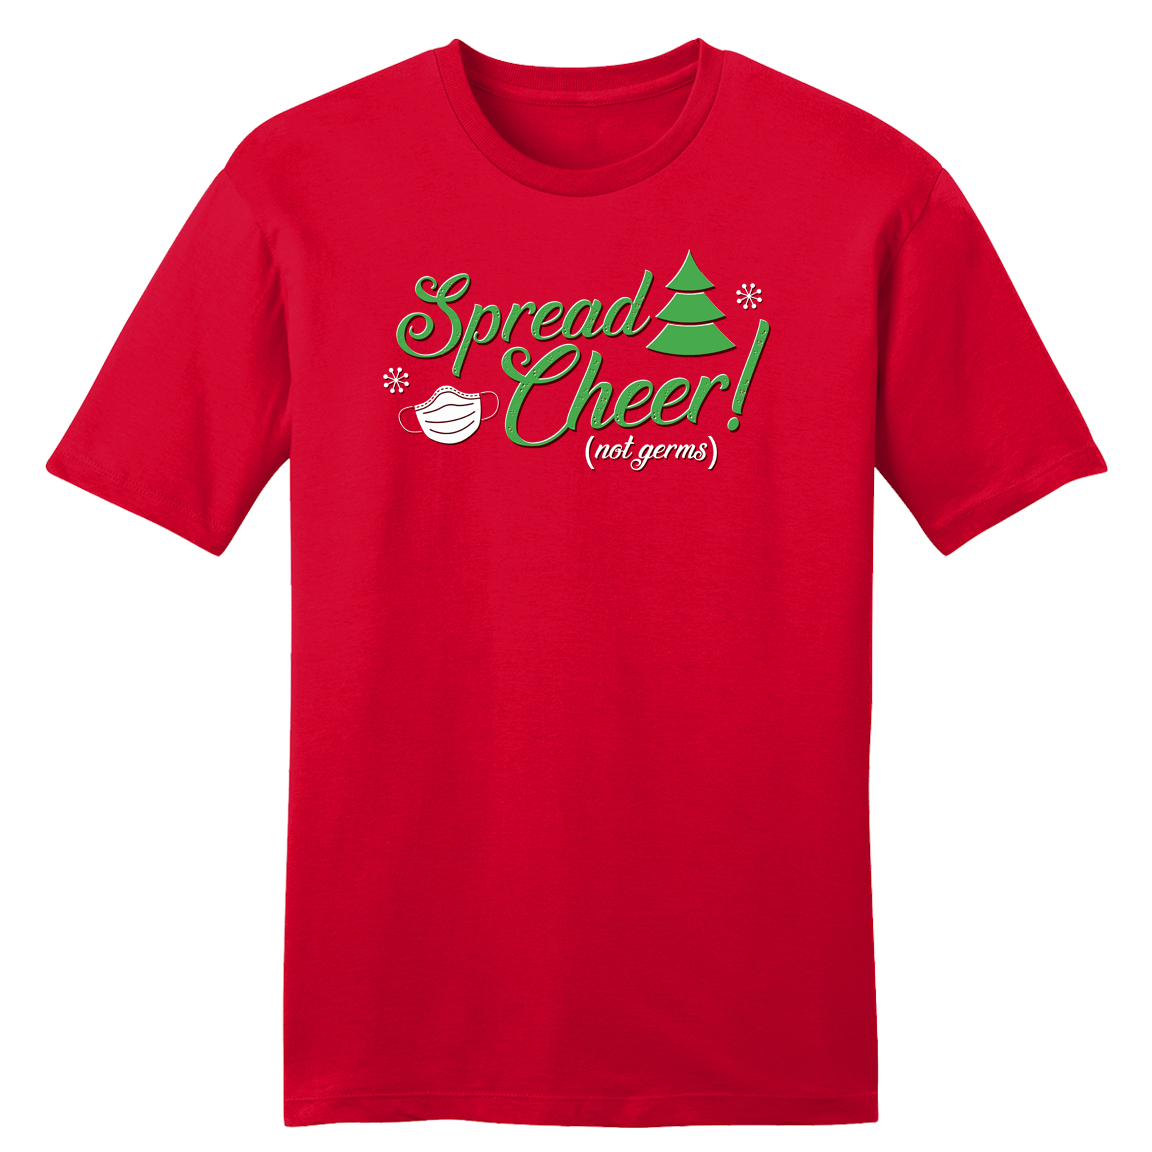 Spread Cheer, Not Germs T-shirt